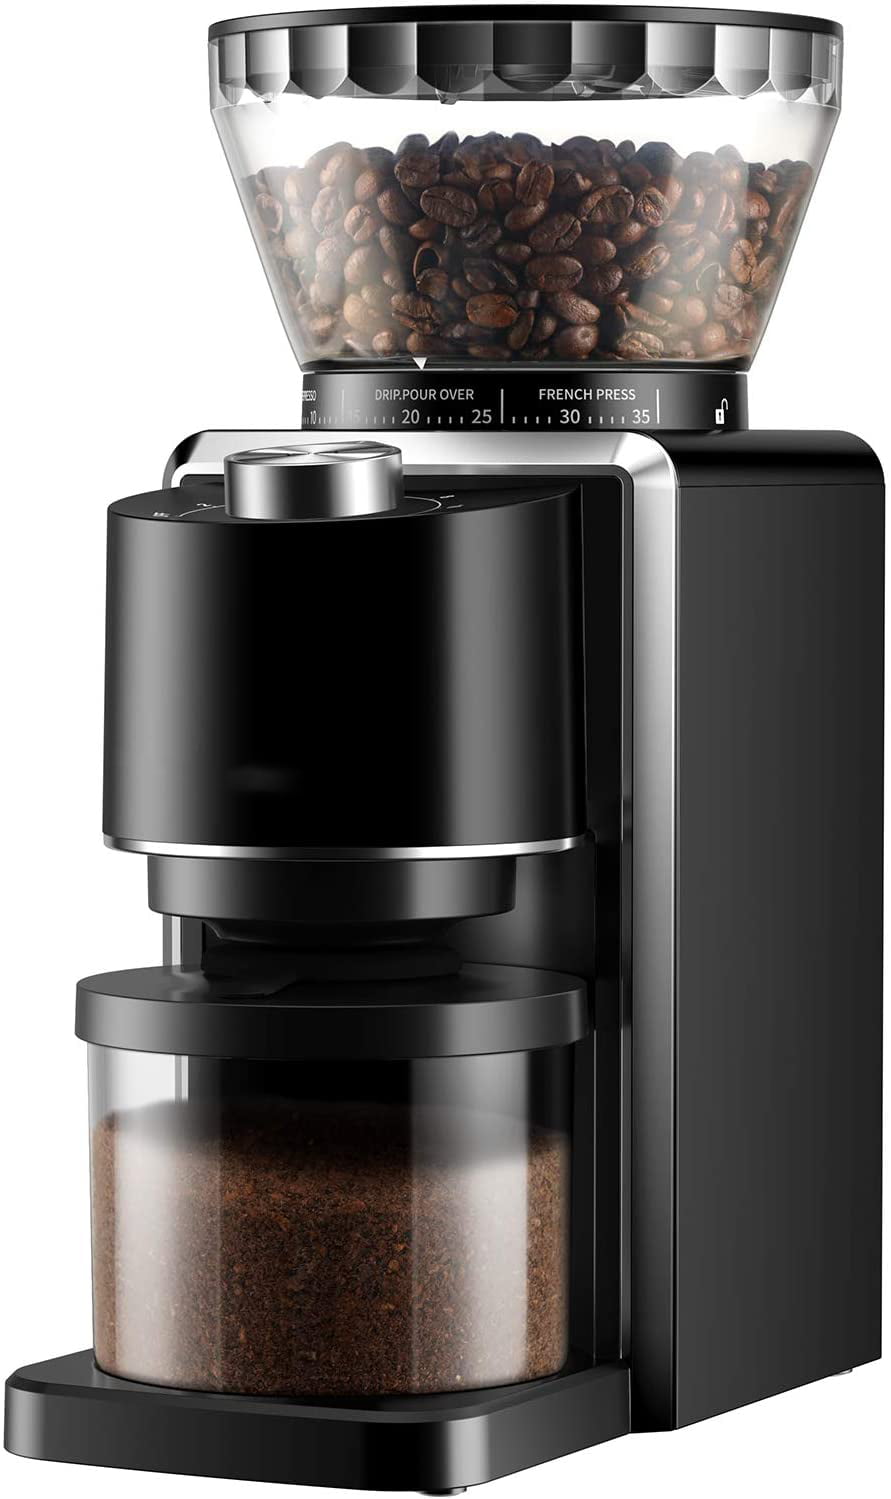 Ceramic Coffee Grinder Adjustable Burr Conical Coffee Grinder with 15 Precise Grind Setting for 2-10 Cups Pour Over & French Press Coffee Drip Coffee Black Electric Coffee Grinder for Espresso 